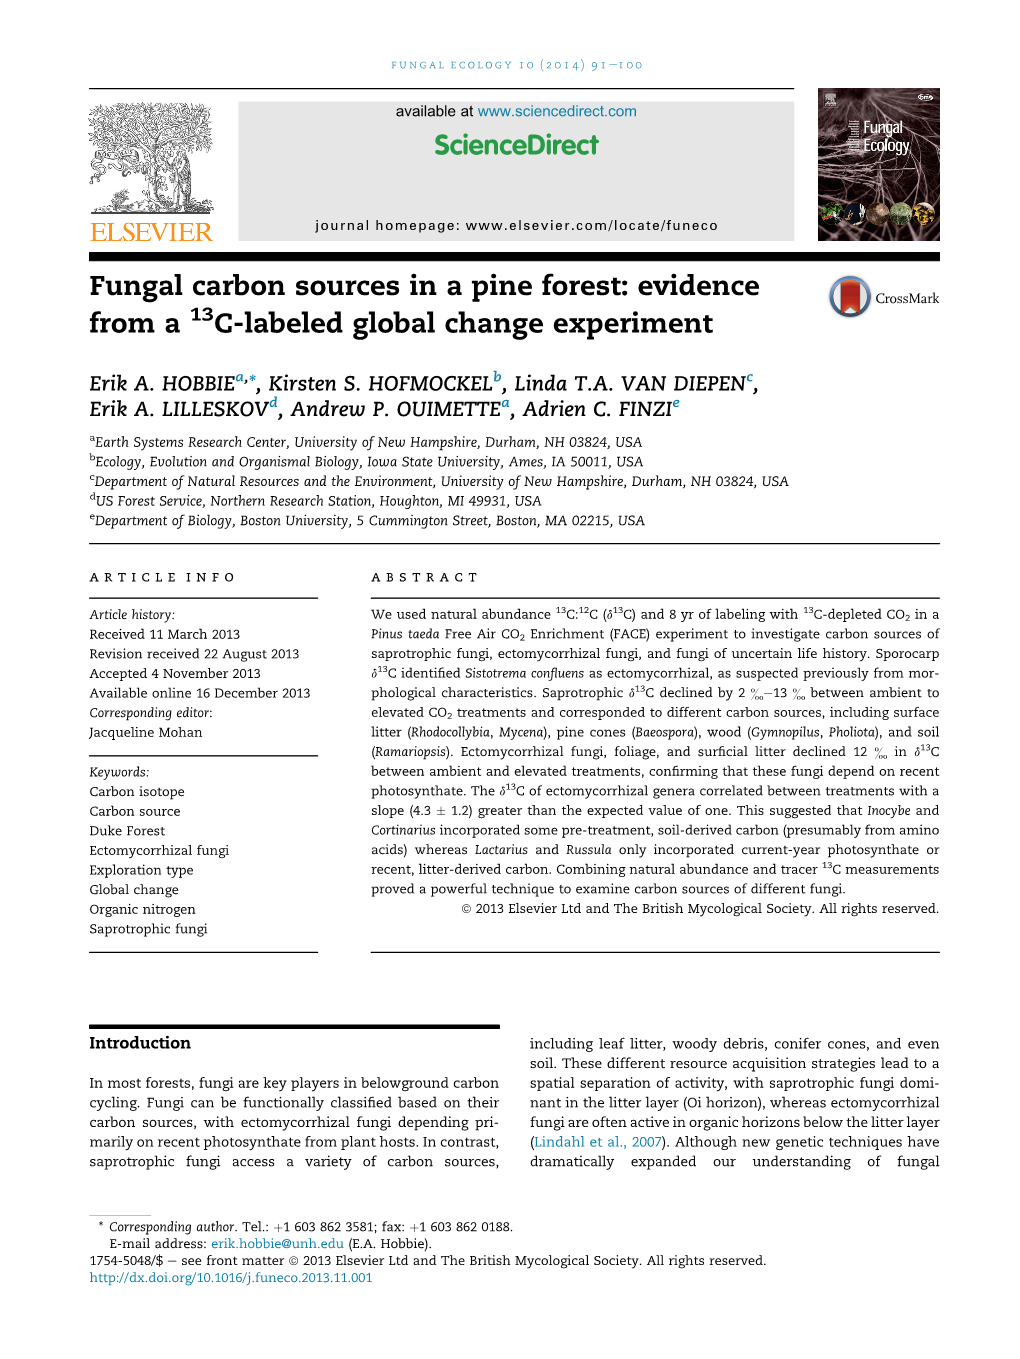 Fungal Carbon Sources in a Pine Forest: Evidence from a 13C-Labeled Global Change Experiment